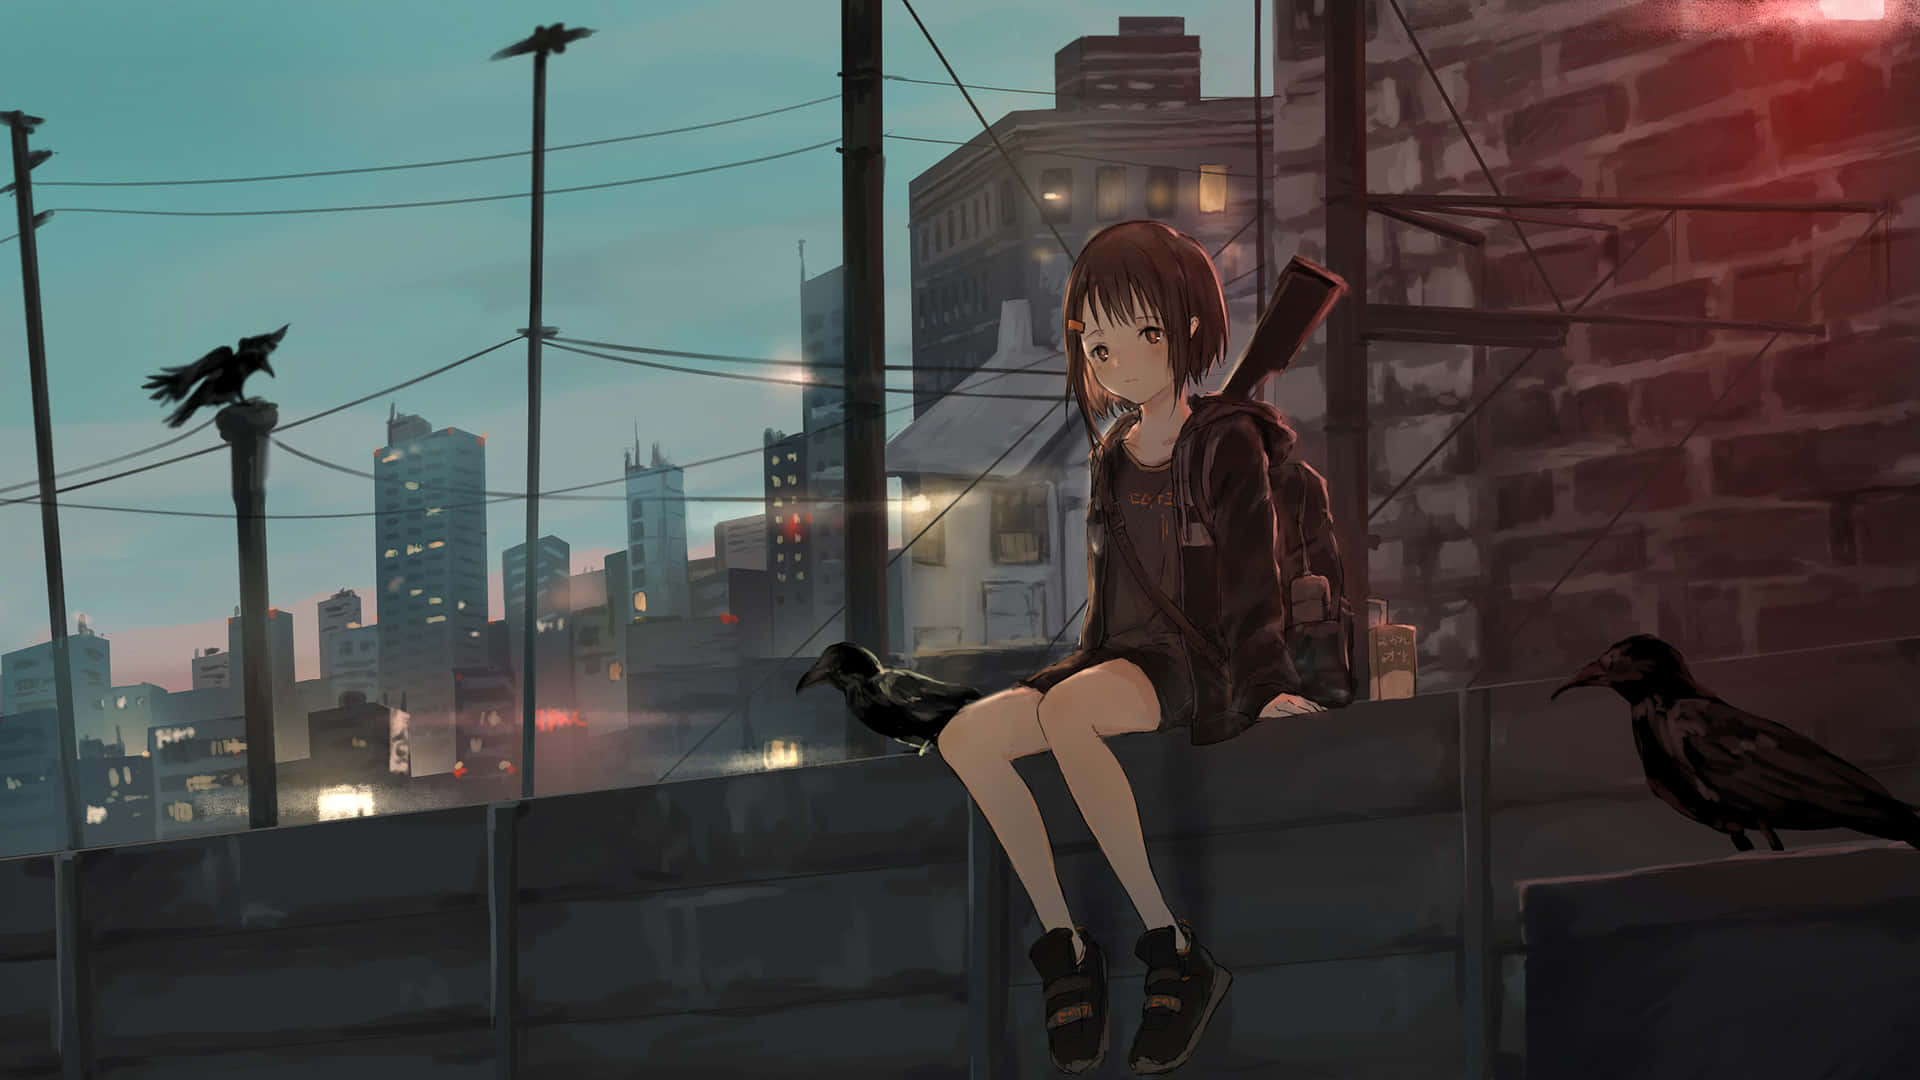 Dusk_with_ Crows_ Anime_ Art_2560x1440 Wallpaper